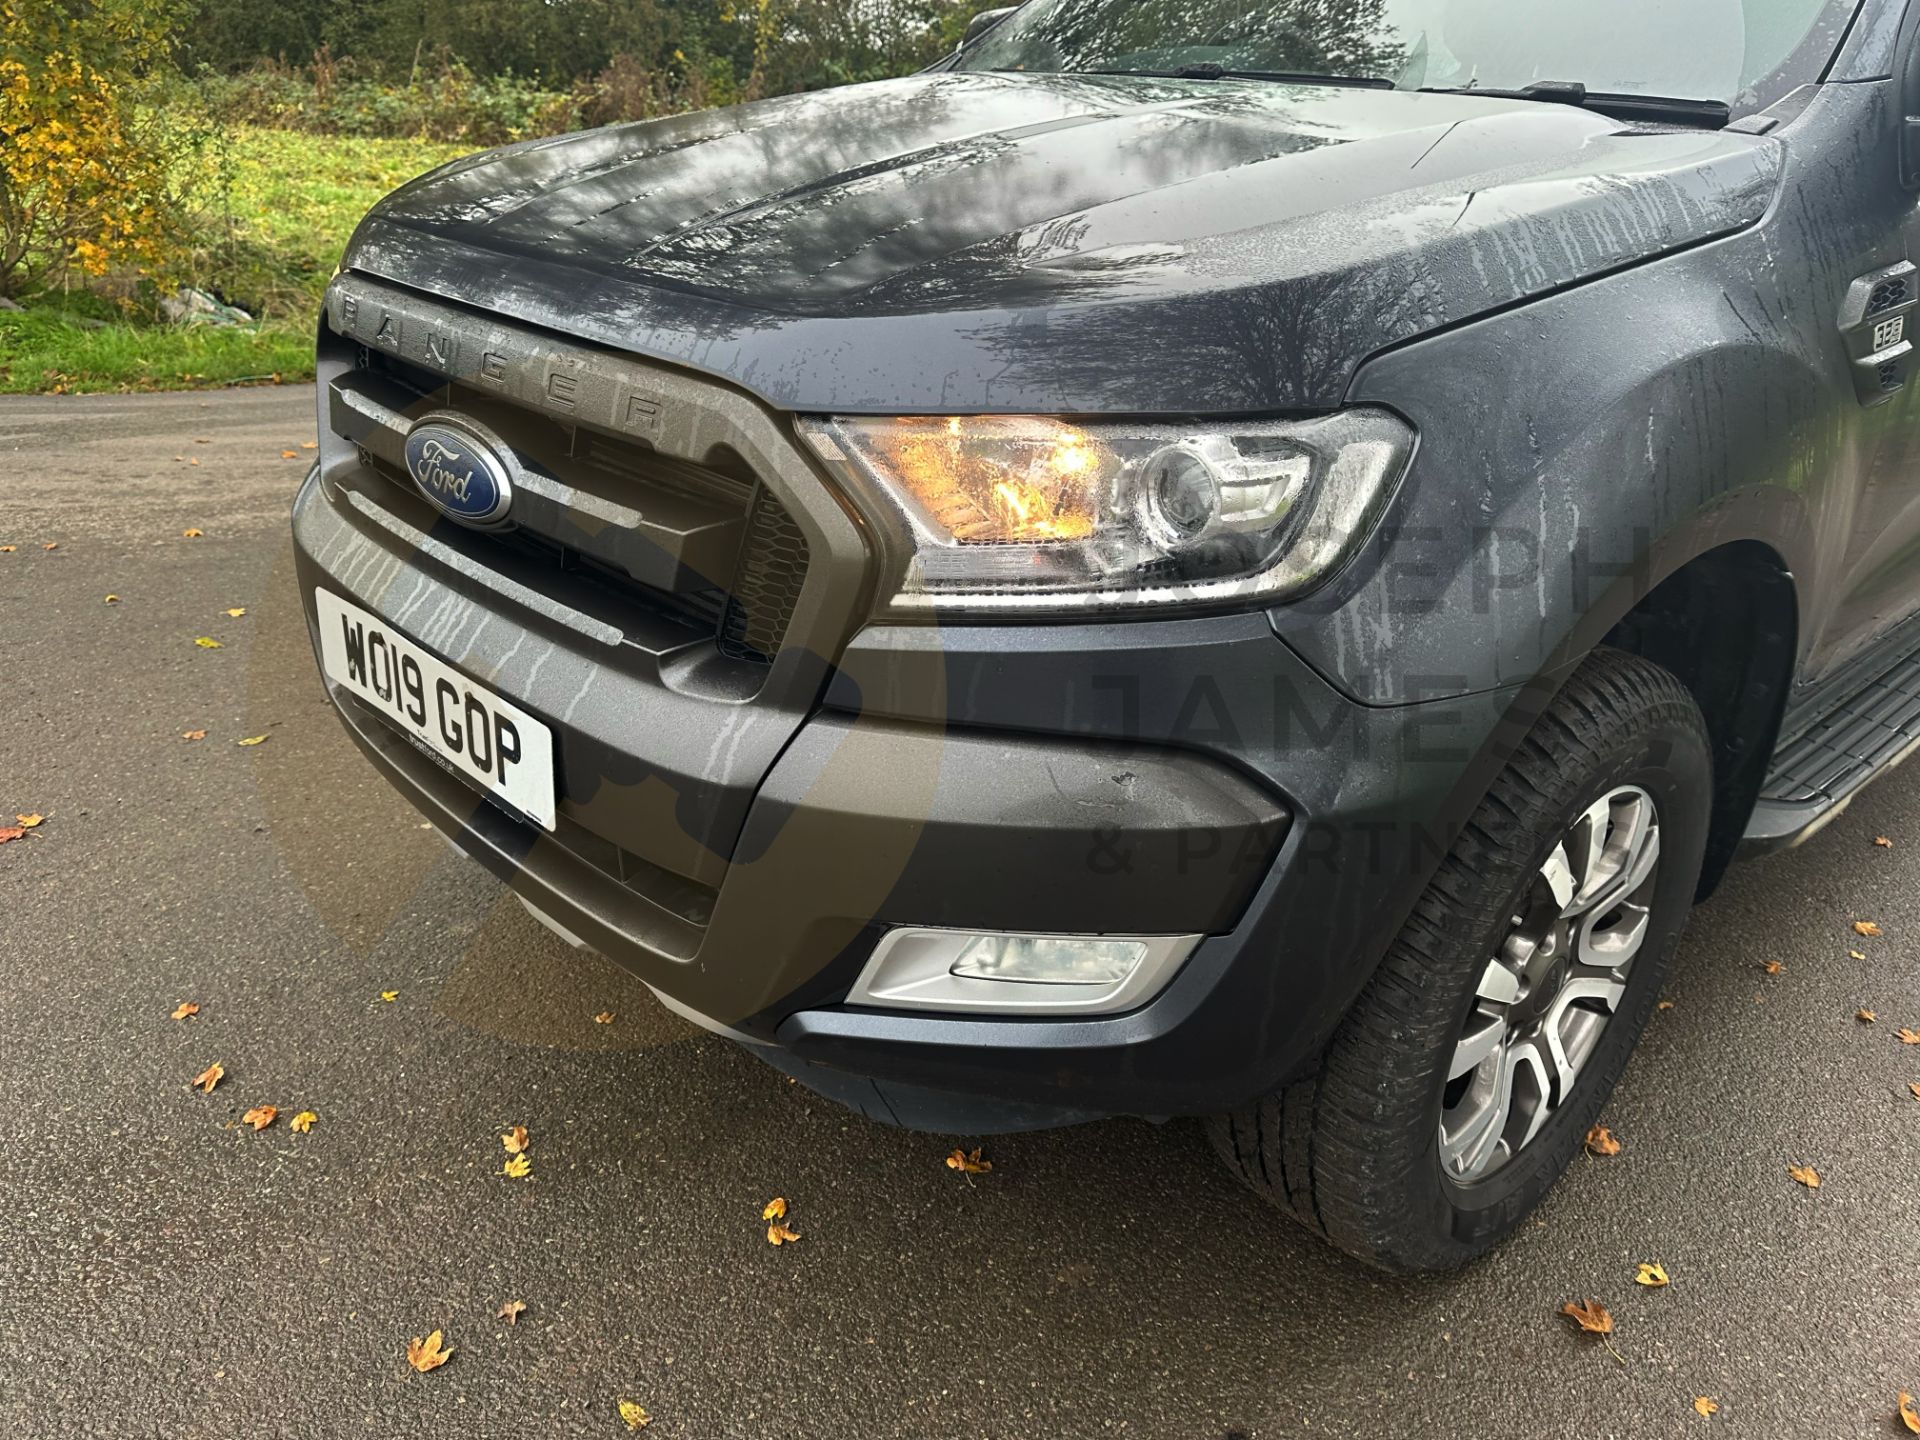 FORD RANGER *WILDTRAK EDITION* DOUBLE CAB PICK-UP (2019 - EURO 6) 3.2 TDCI - AUTOMATIC (1 OWNER) - Image 19 of 52